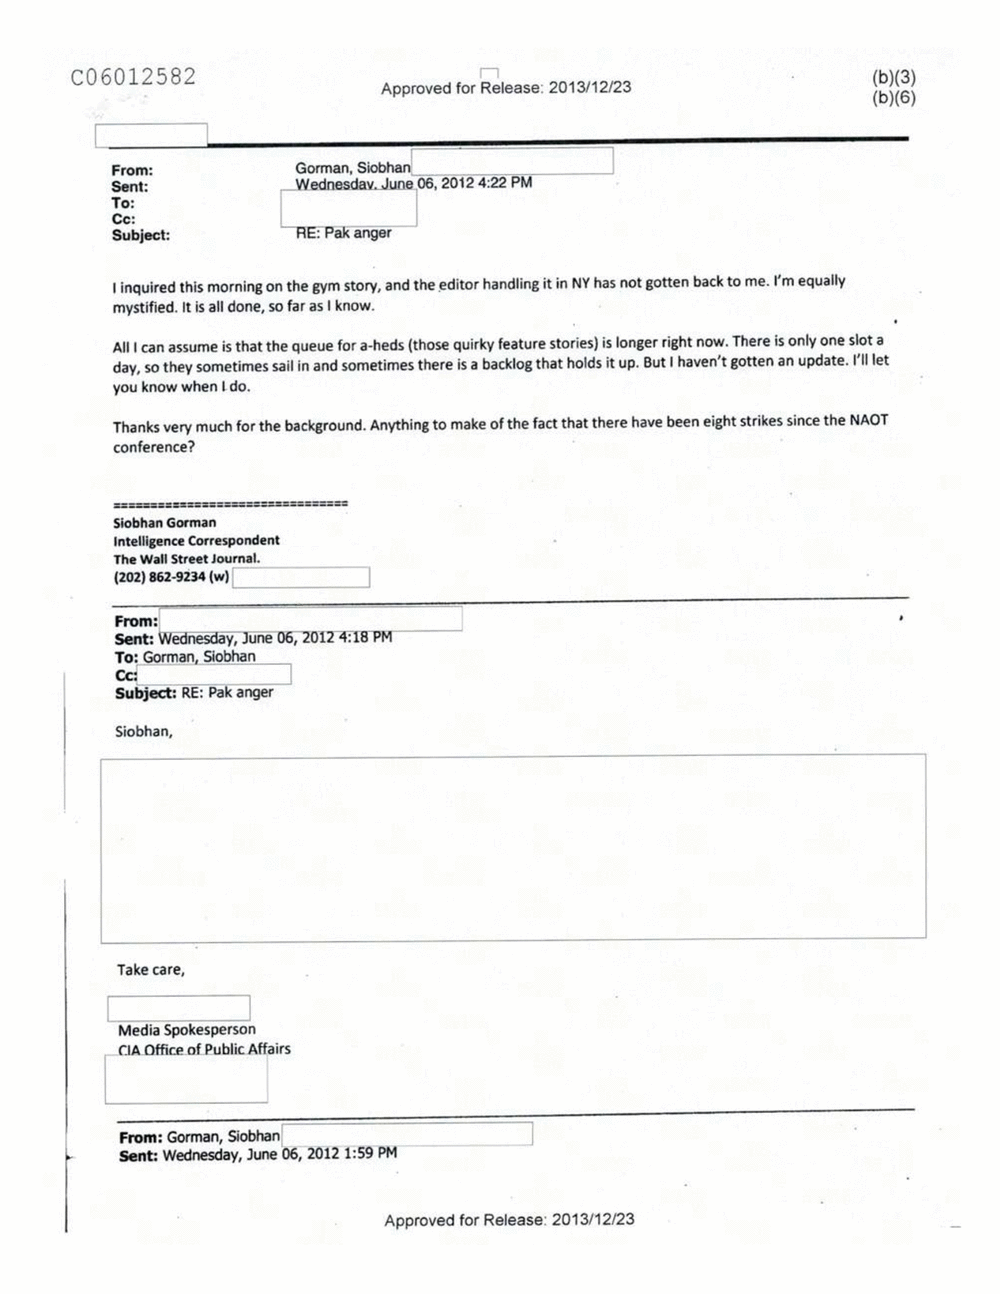 Page 123 from Email Correspondence Between Reporters and CIA Flacks